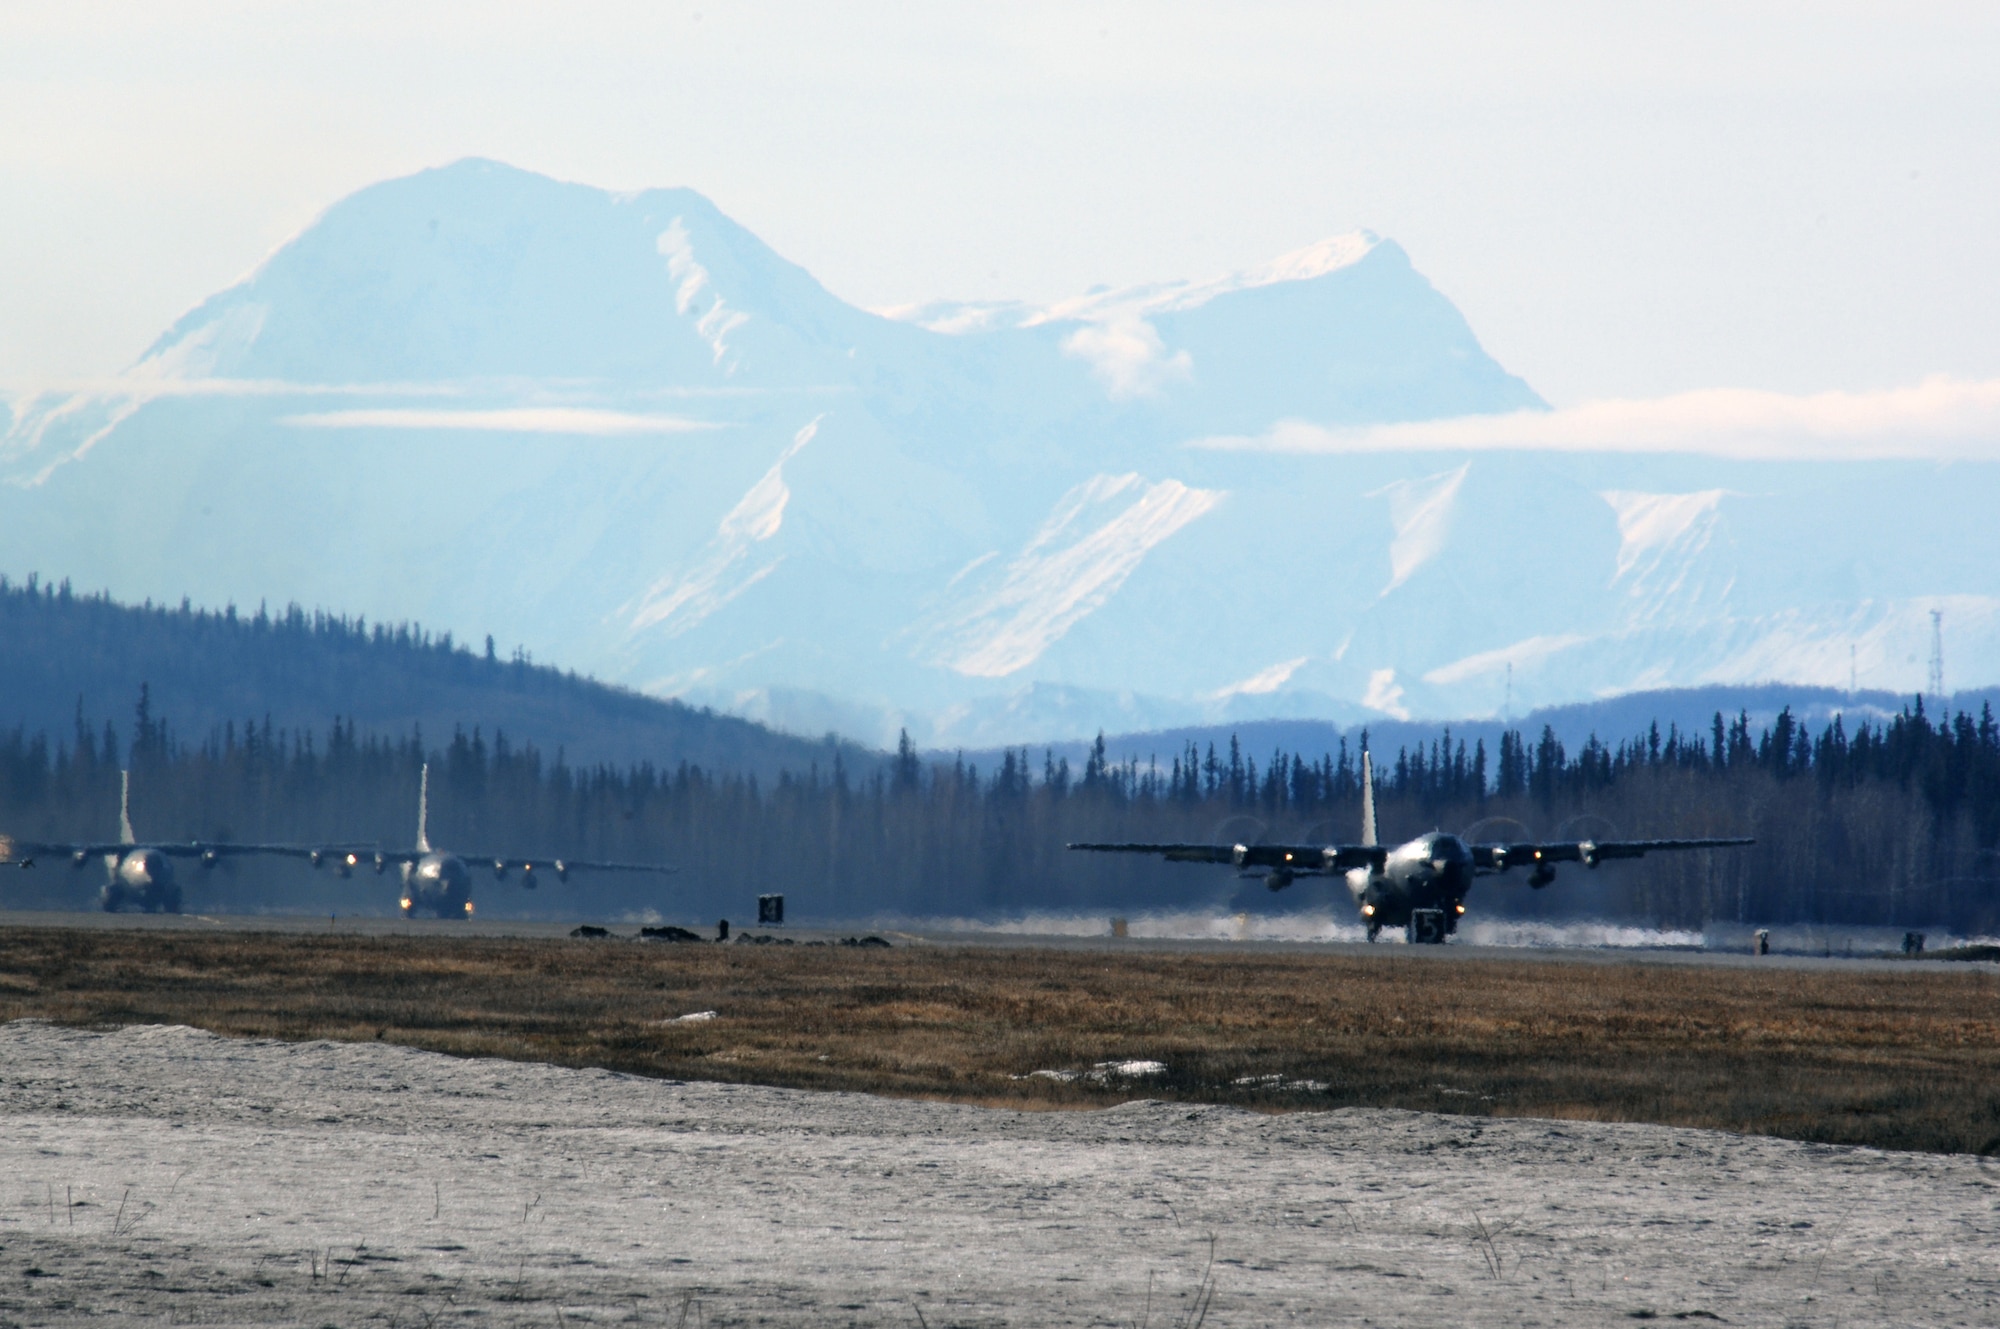 EIELSON AIR FORCE BASE, Alaska -- Two C-130 and one C-160 aircraft from the Armee de l'Air (French Air Force), take off for a mission during Red Flag-Alaska 07-1 here on April 10. Red Flag-Alaska is a Pacific Air Forces-directed field training exercise for U.S. forces flown under simulated air combat conditions. It is conducted on the Pacific Alaskan Range Complex with air operations flown out of Eielson and Elmendorf Air Force Bases.
(U.S. Air Force Photo by Staff Sgt Joshua Strang)